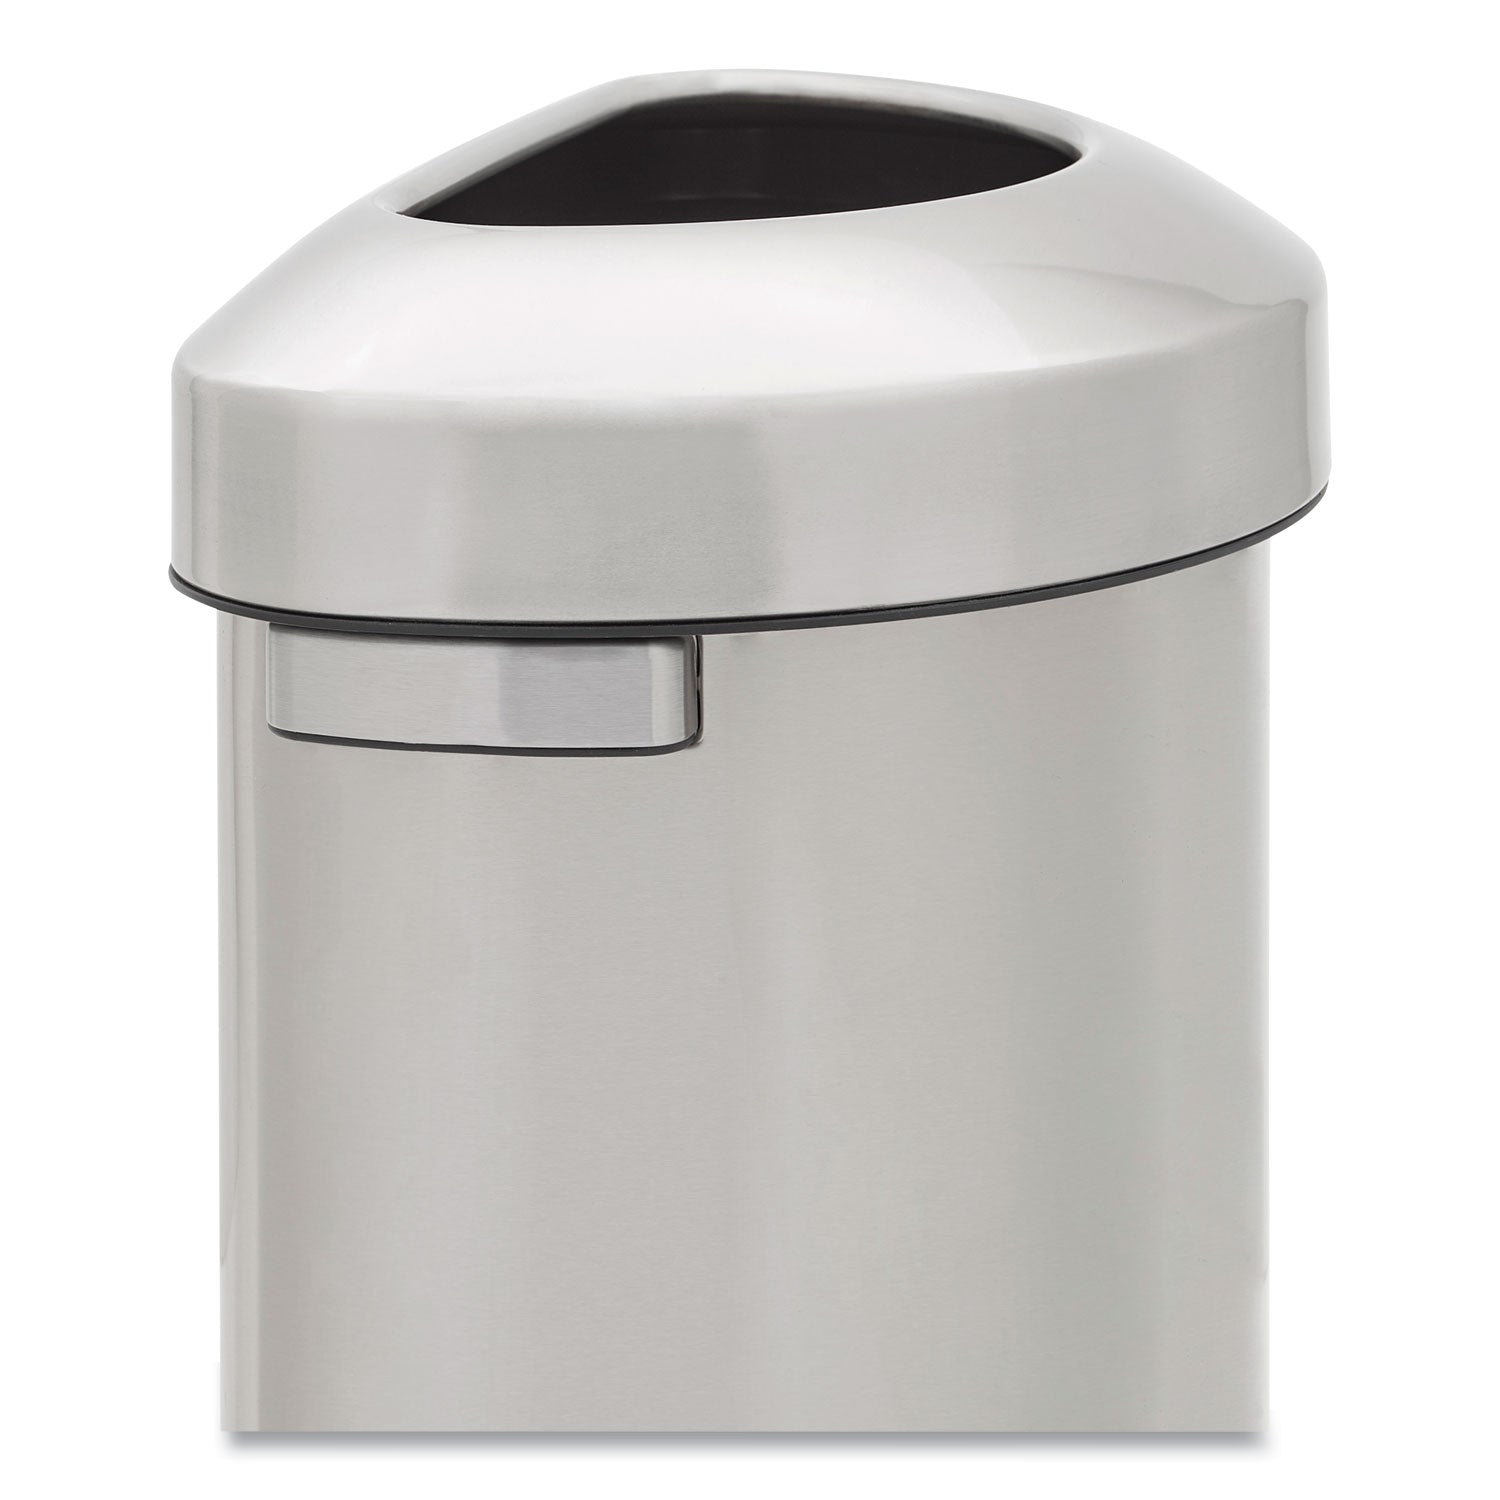 Rubbermaid Commercial Refine Half-Round Waste Container - 16 gal Capacity - Half-round - Ergonomic Handle, Non-skid, Fingerprint Resistant, Durable - 29.5" Height x 12.4" Width x 18.2" Depth - Metal - Stainless Steel - 1 Each - 2